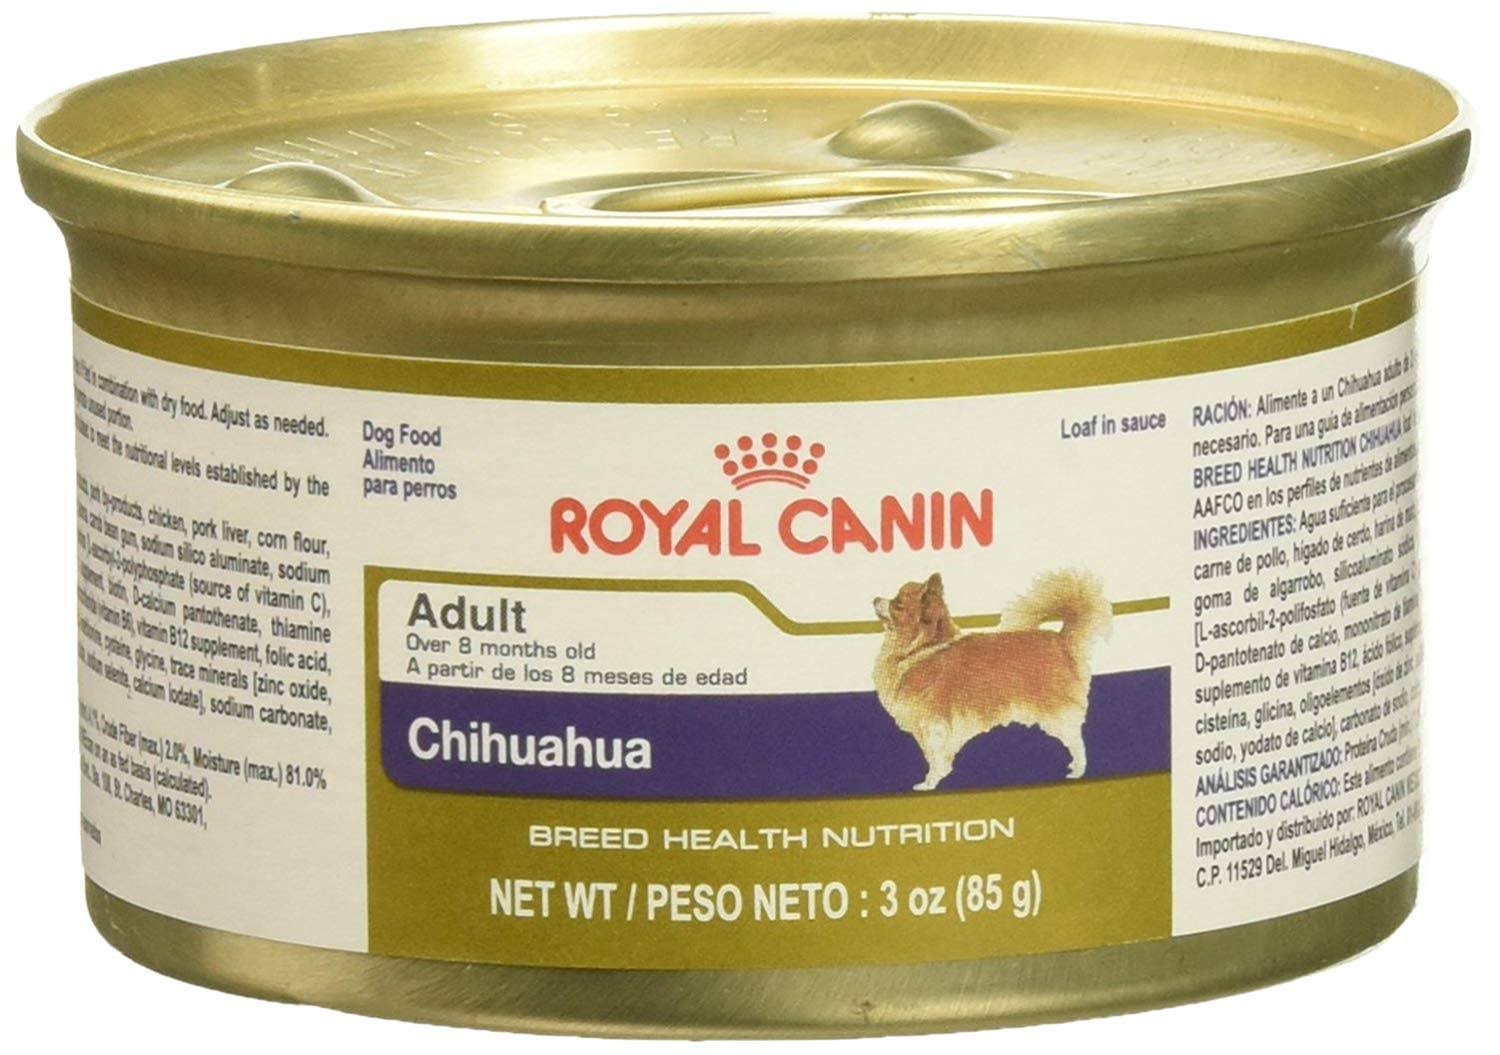 Royal Canin Breed Health Nutrition Chihuahua Loaf in Sauce Canned